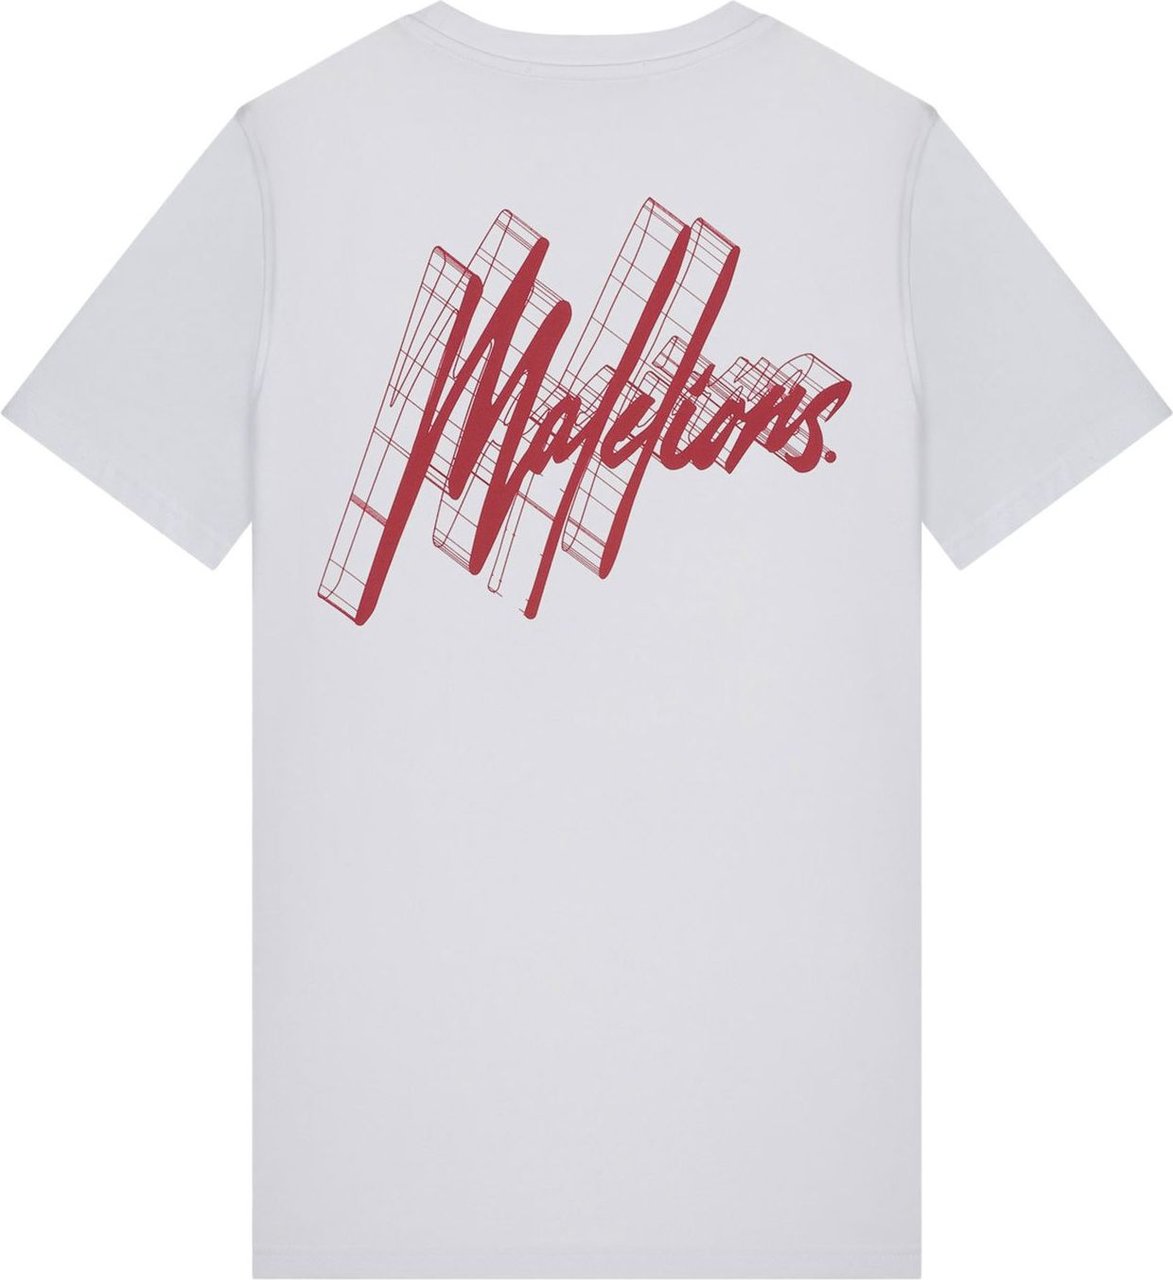 Malelions 3D Graphic T-Shirt - White/Red Wit